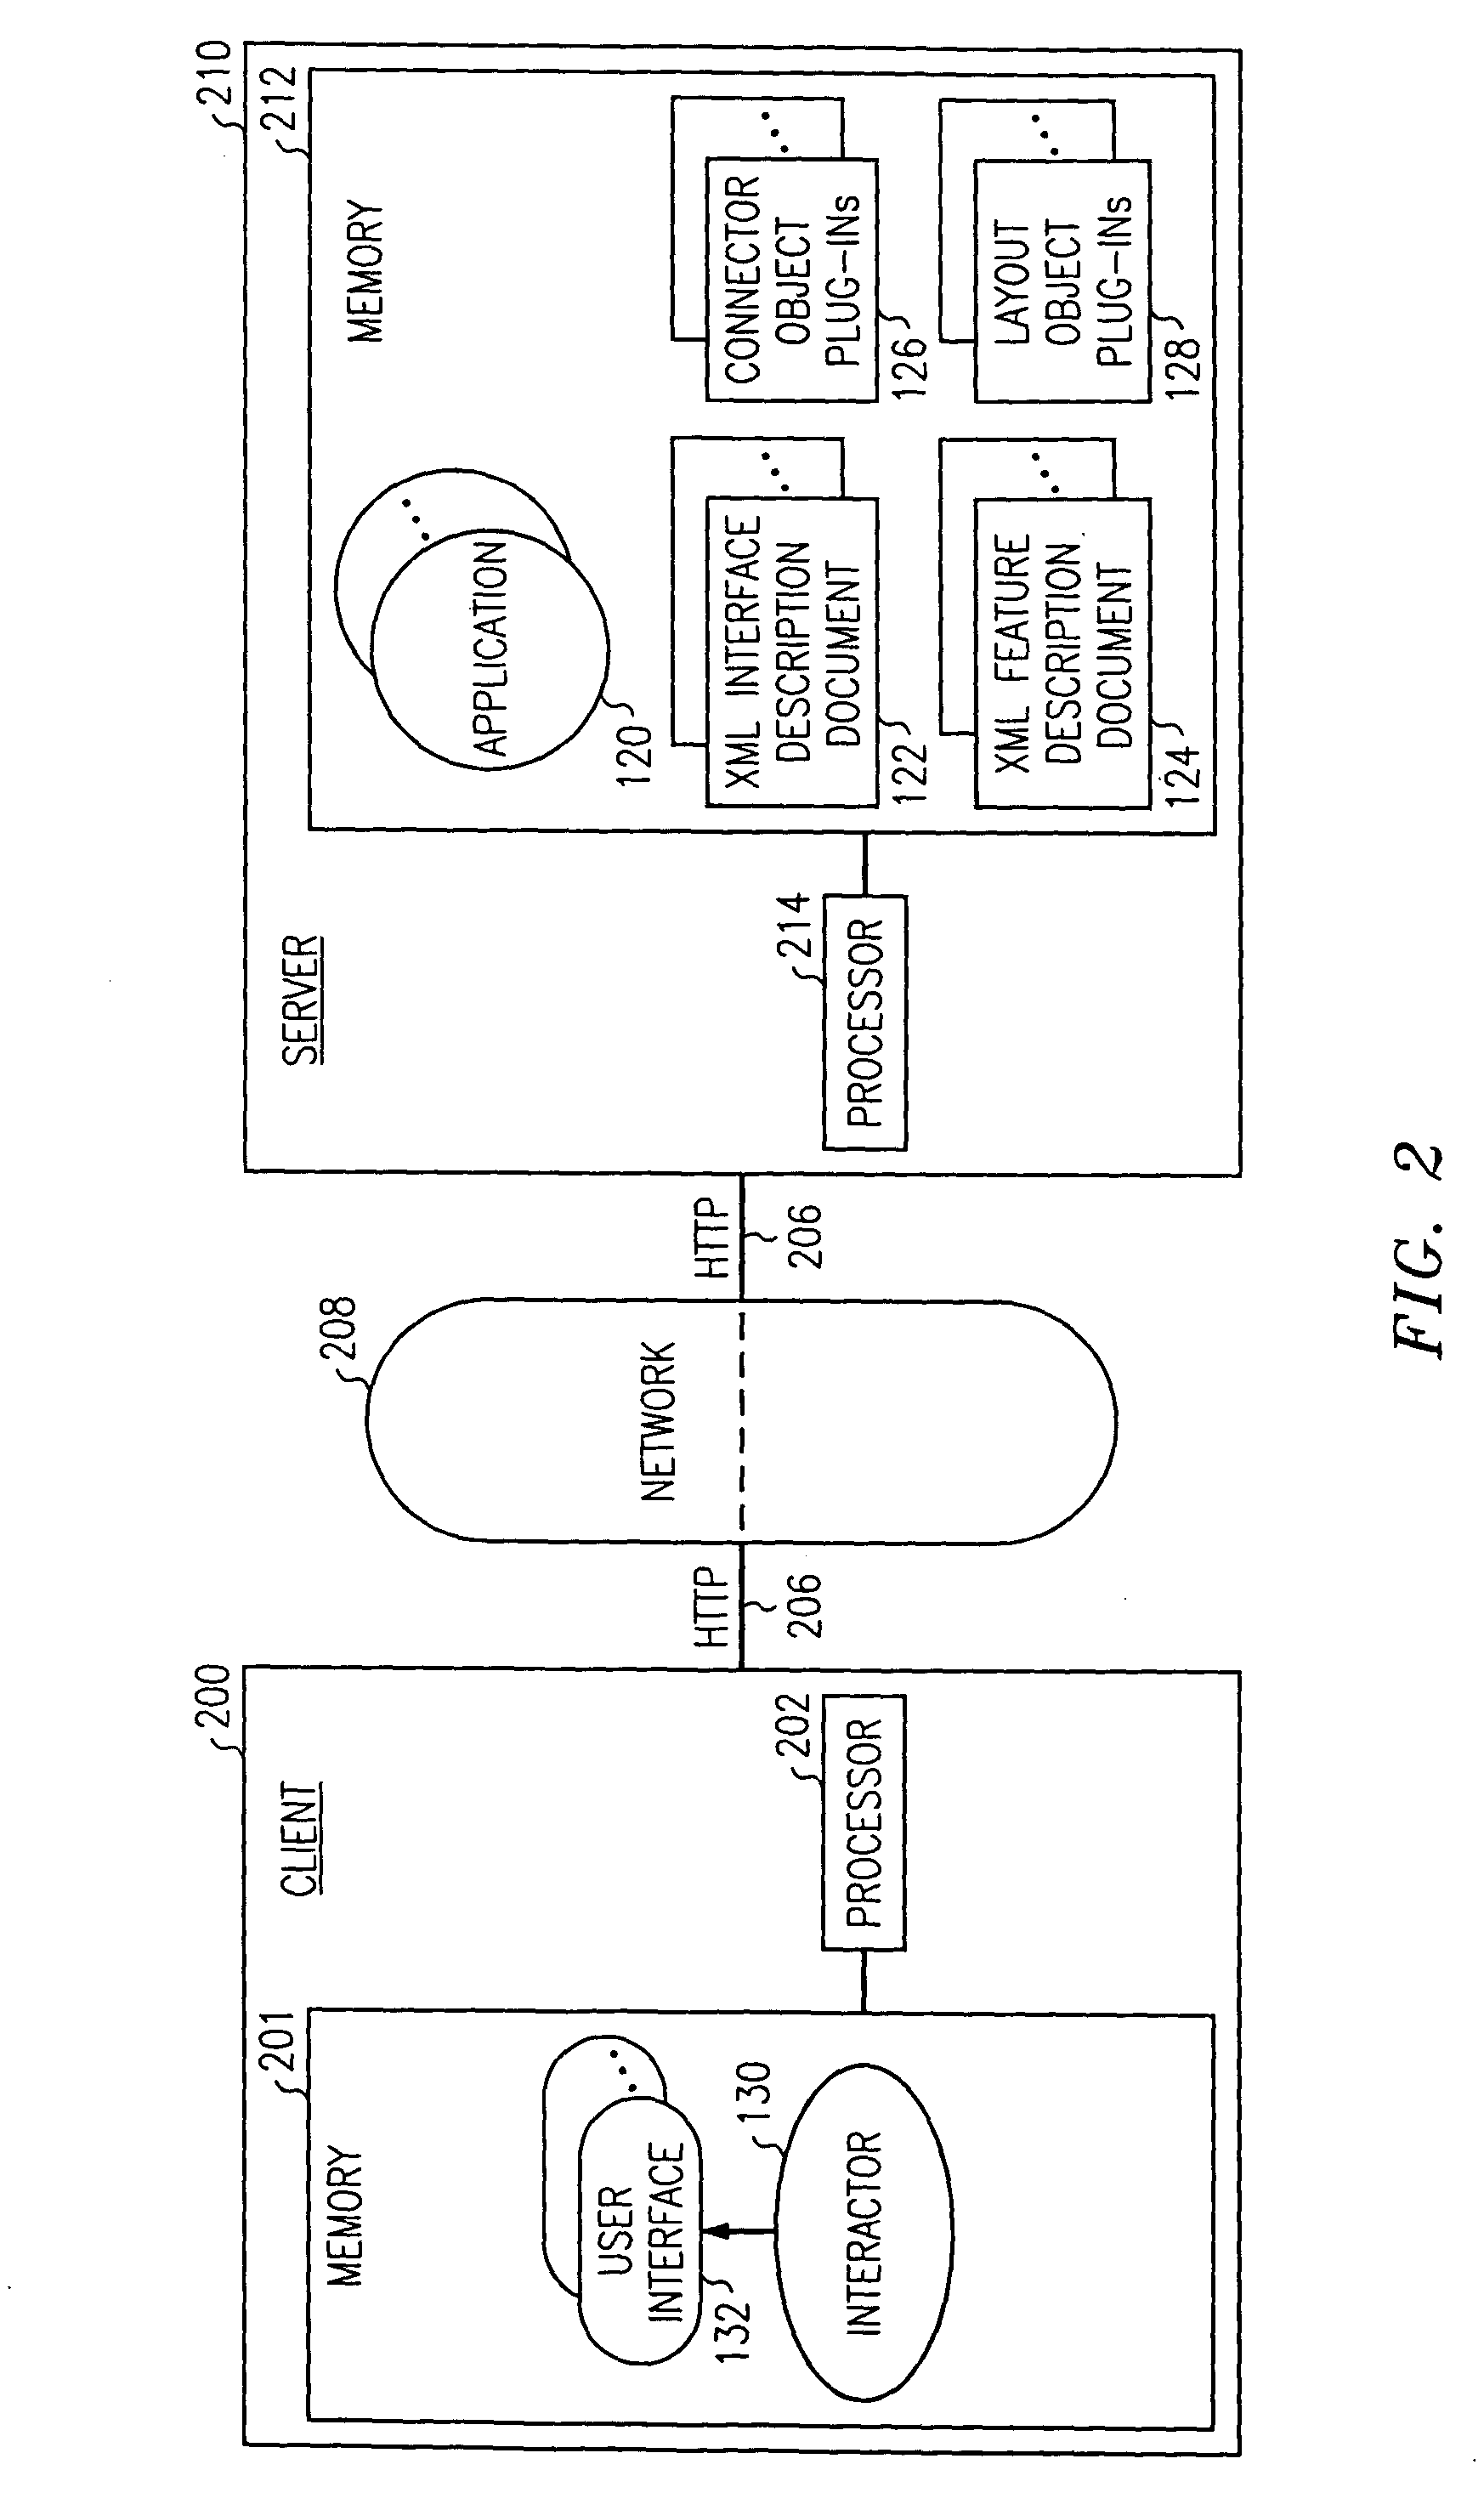 Mark-up language implementation of graphical or non-graphical user interfaces